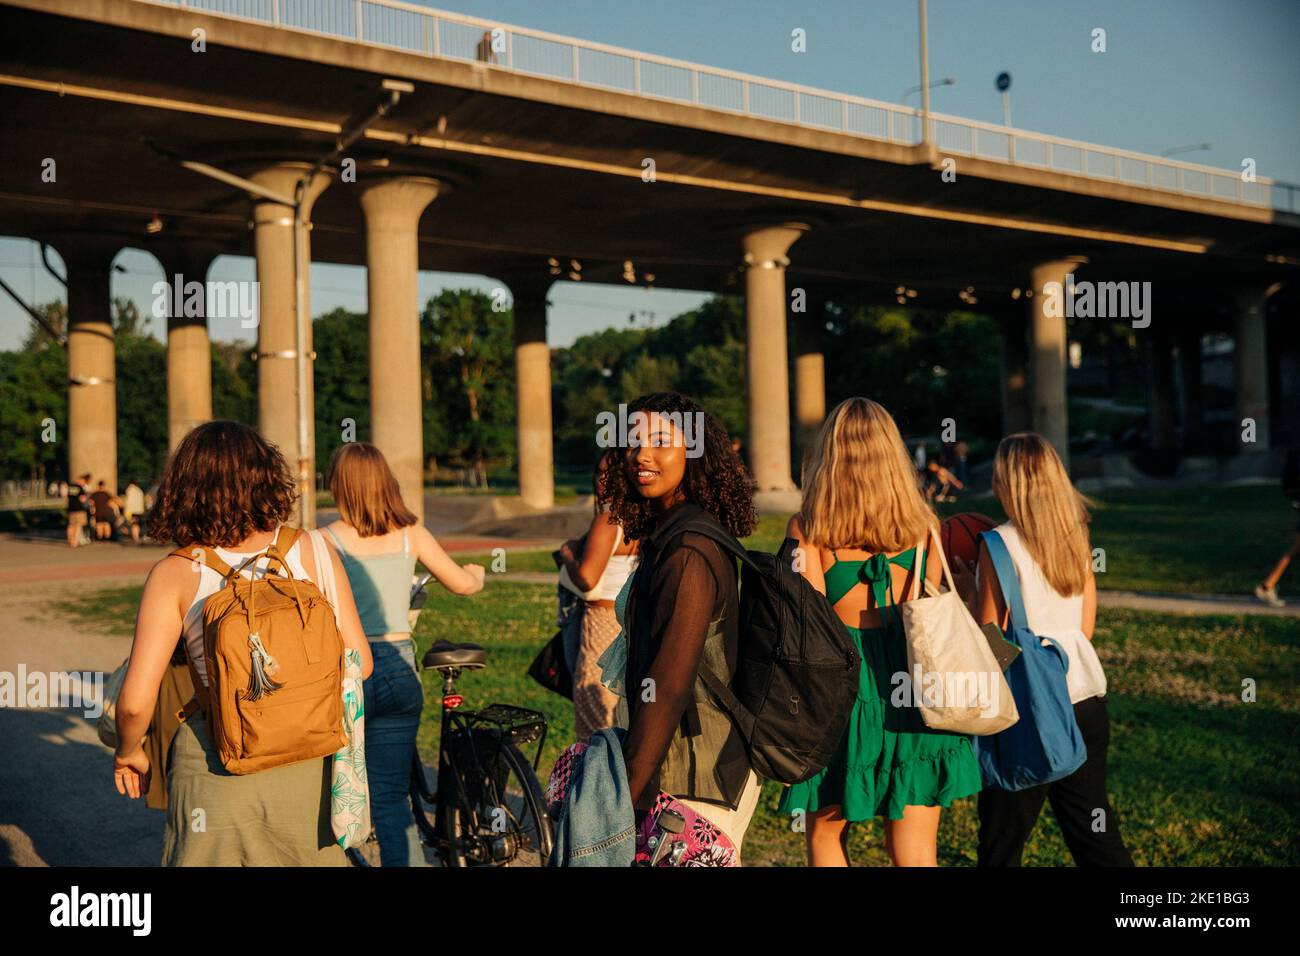 Portrait of smiling teenage girl walking with friends against bridge at park Stock Photo